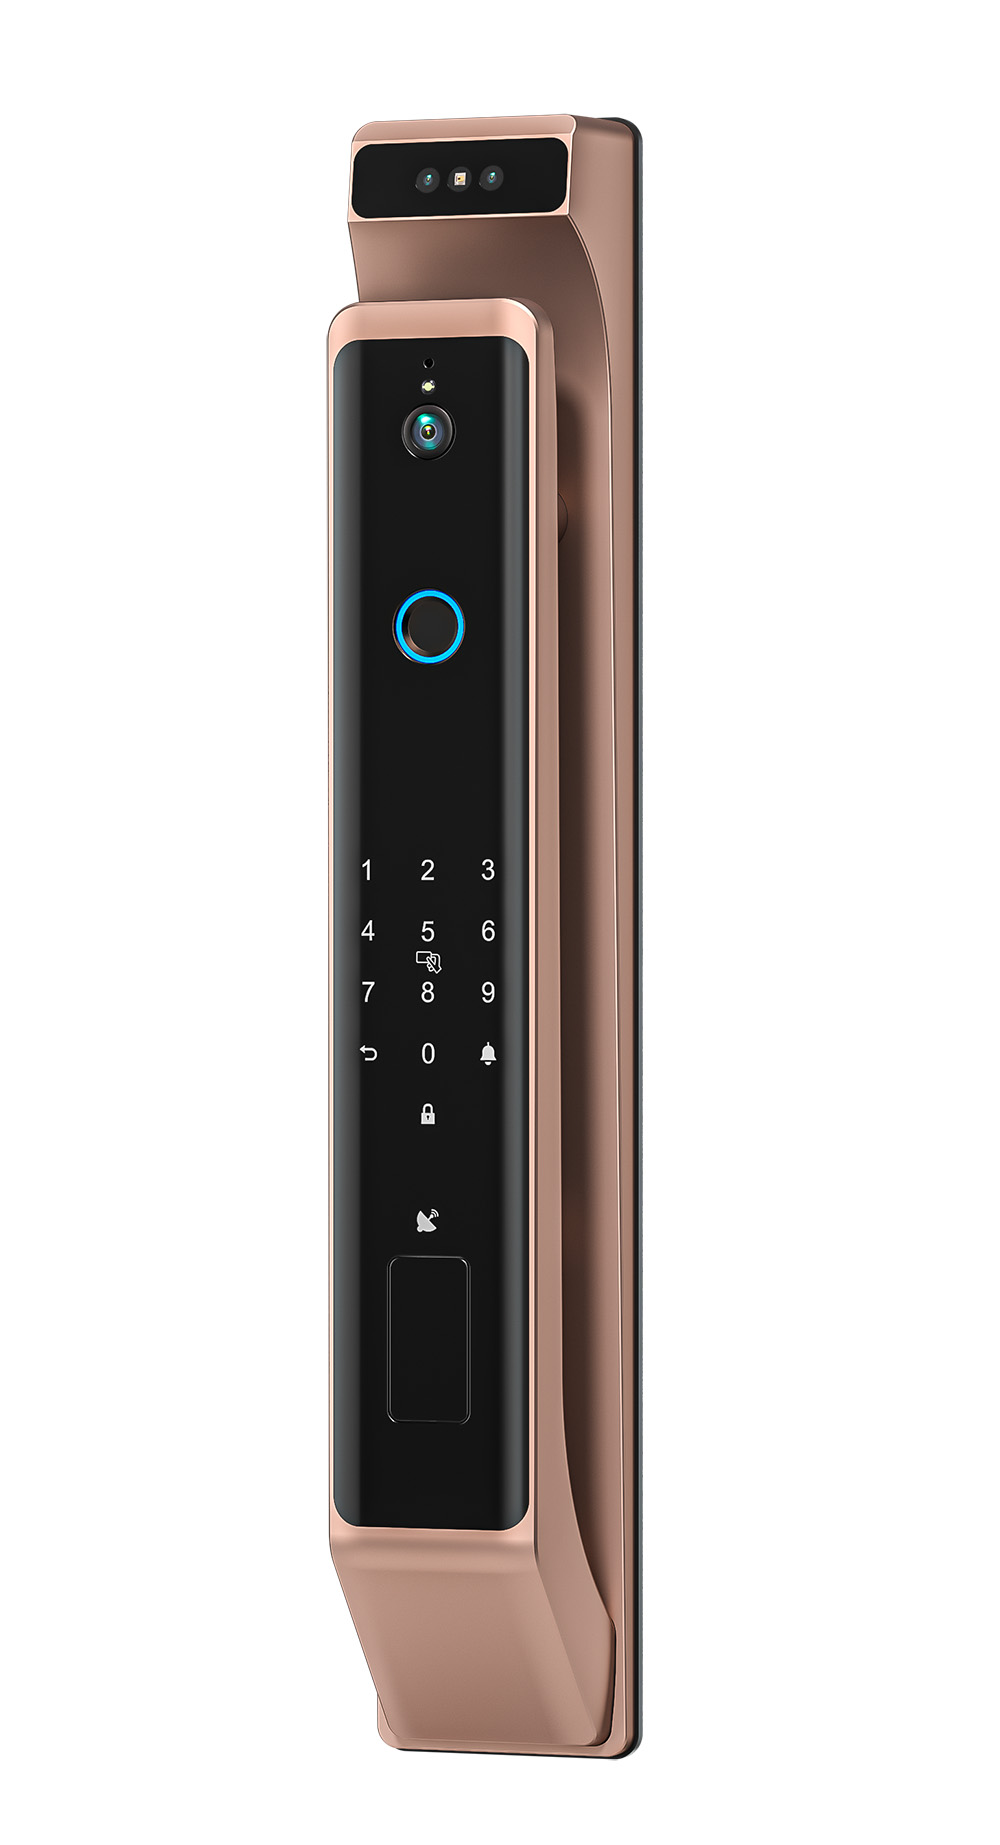 3D Face Recognition Automatic Bluetooth Lock YFBR-K9